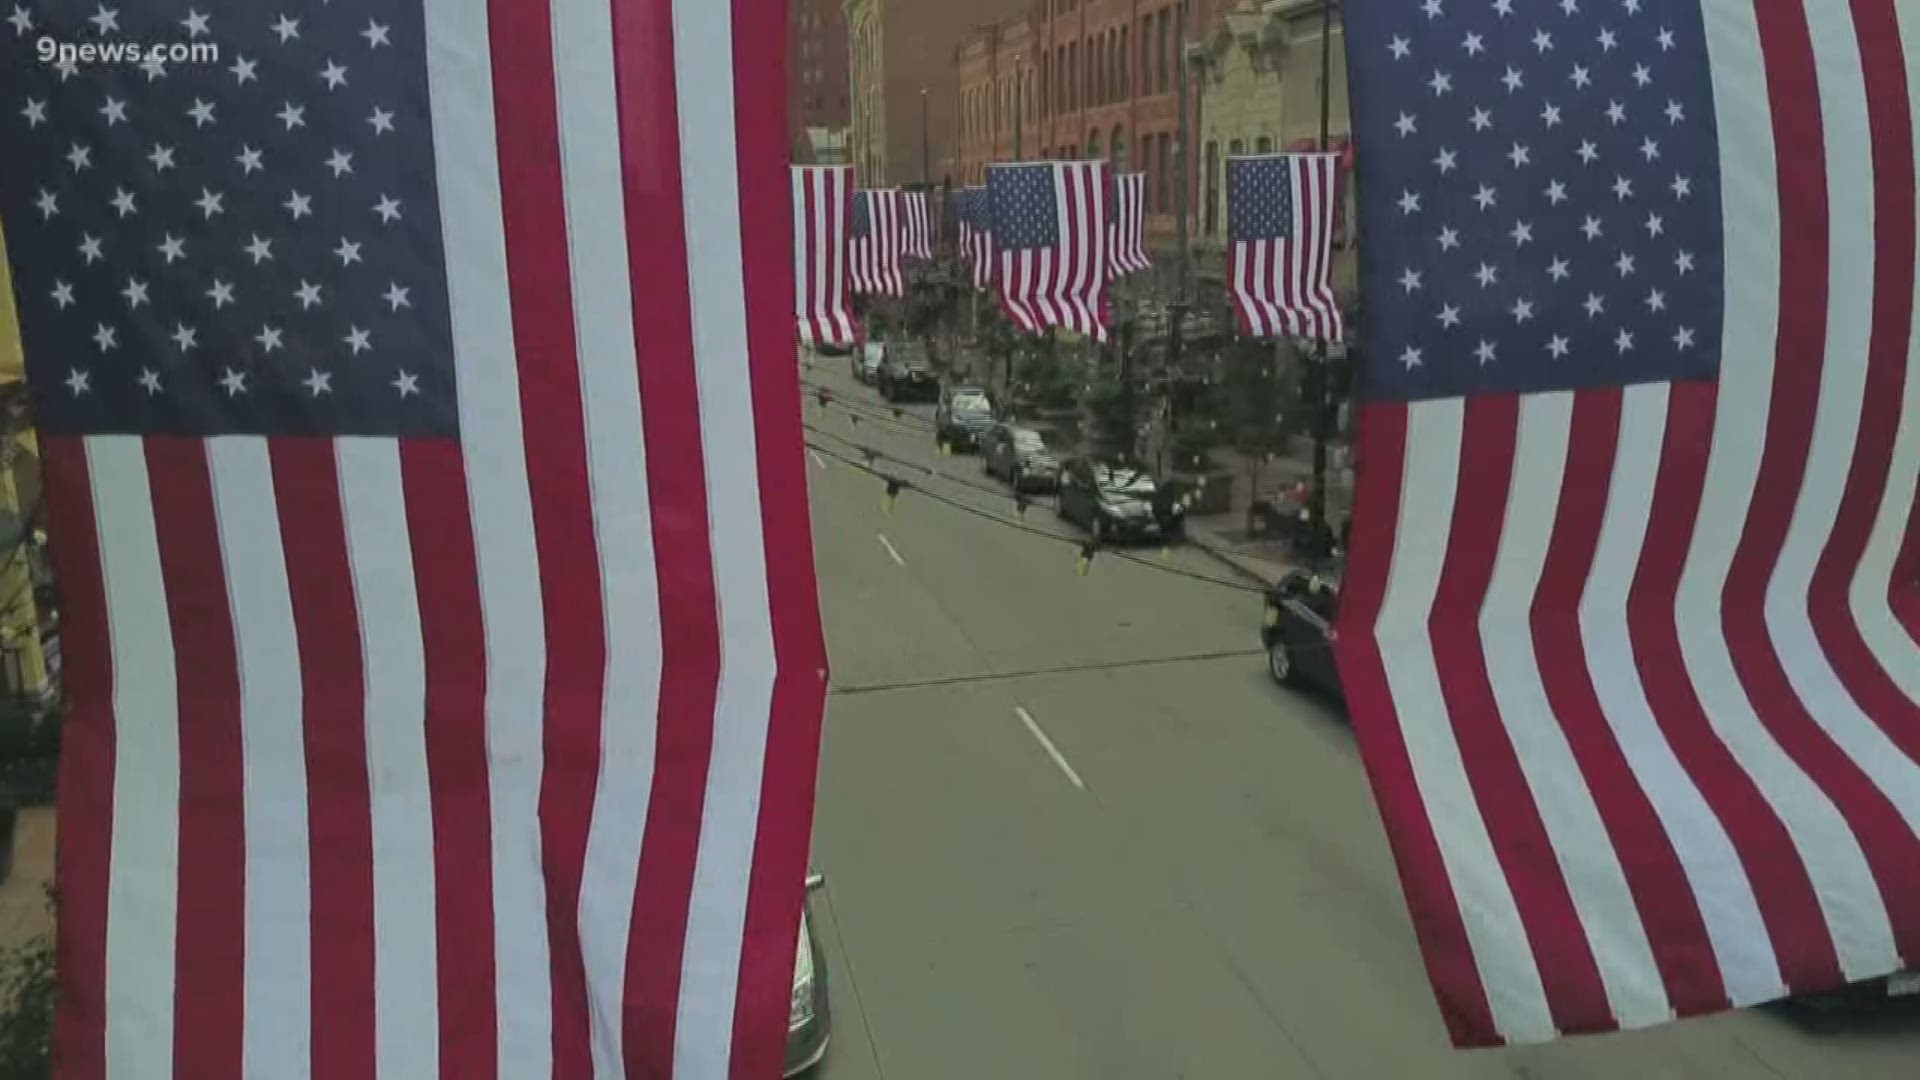 9NEWS reporter Lori Lizarraga and Photojournalist Tom Cole talked with Coloradans about what the American flag means to them.